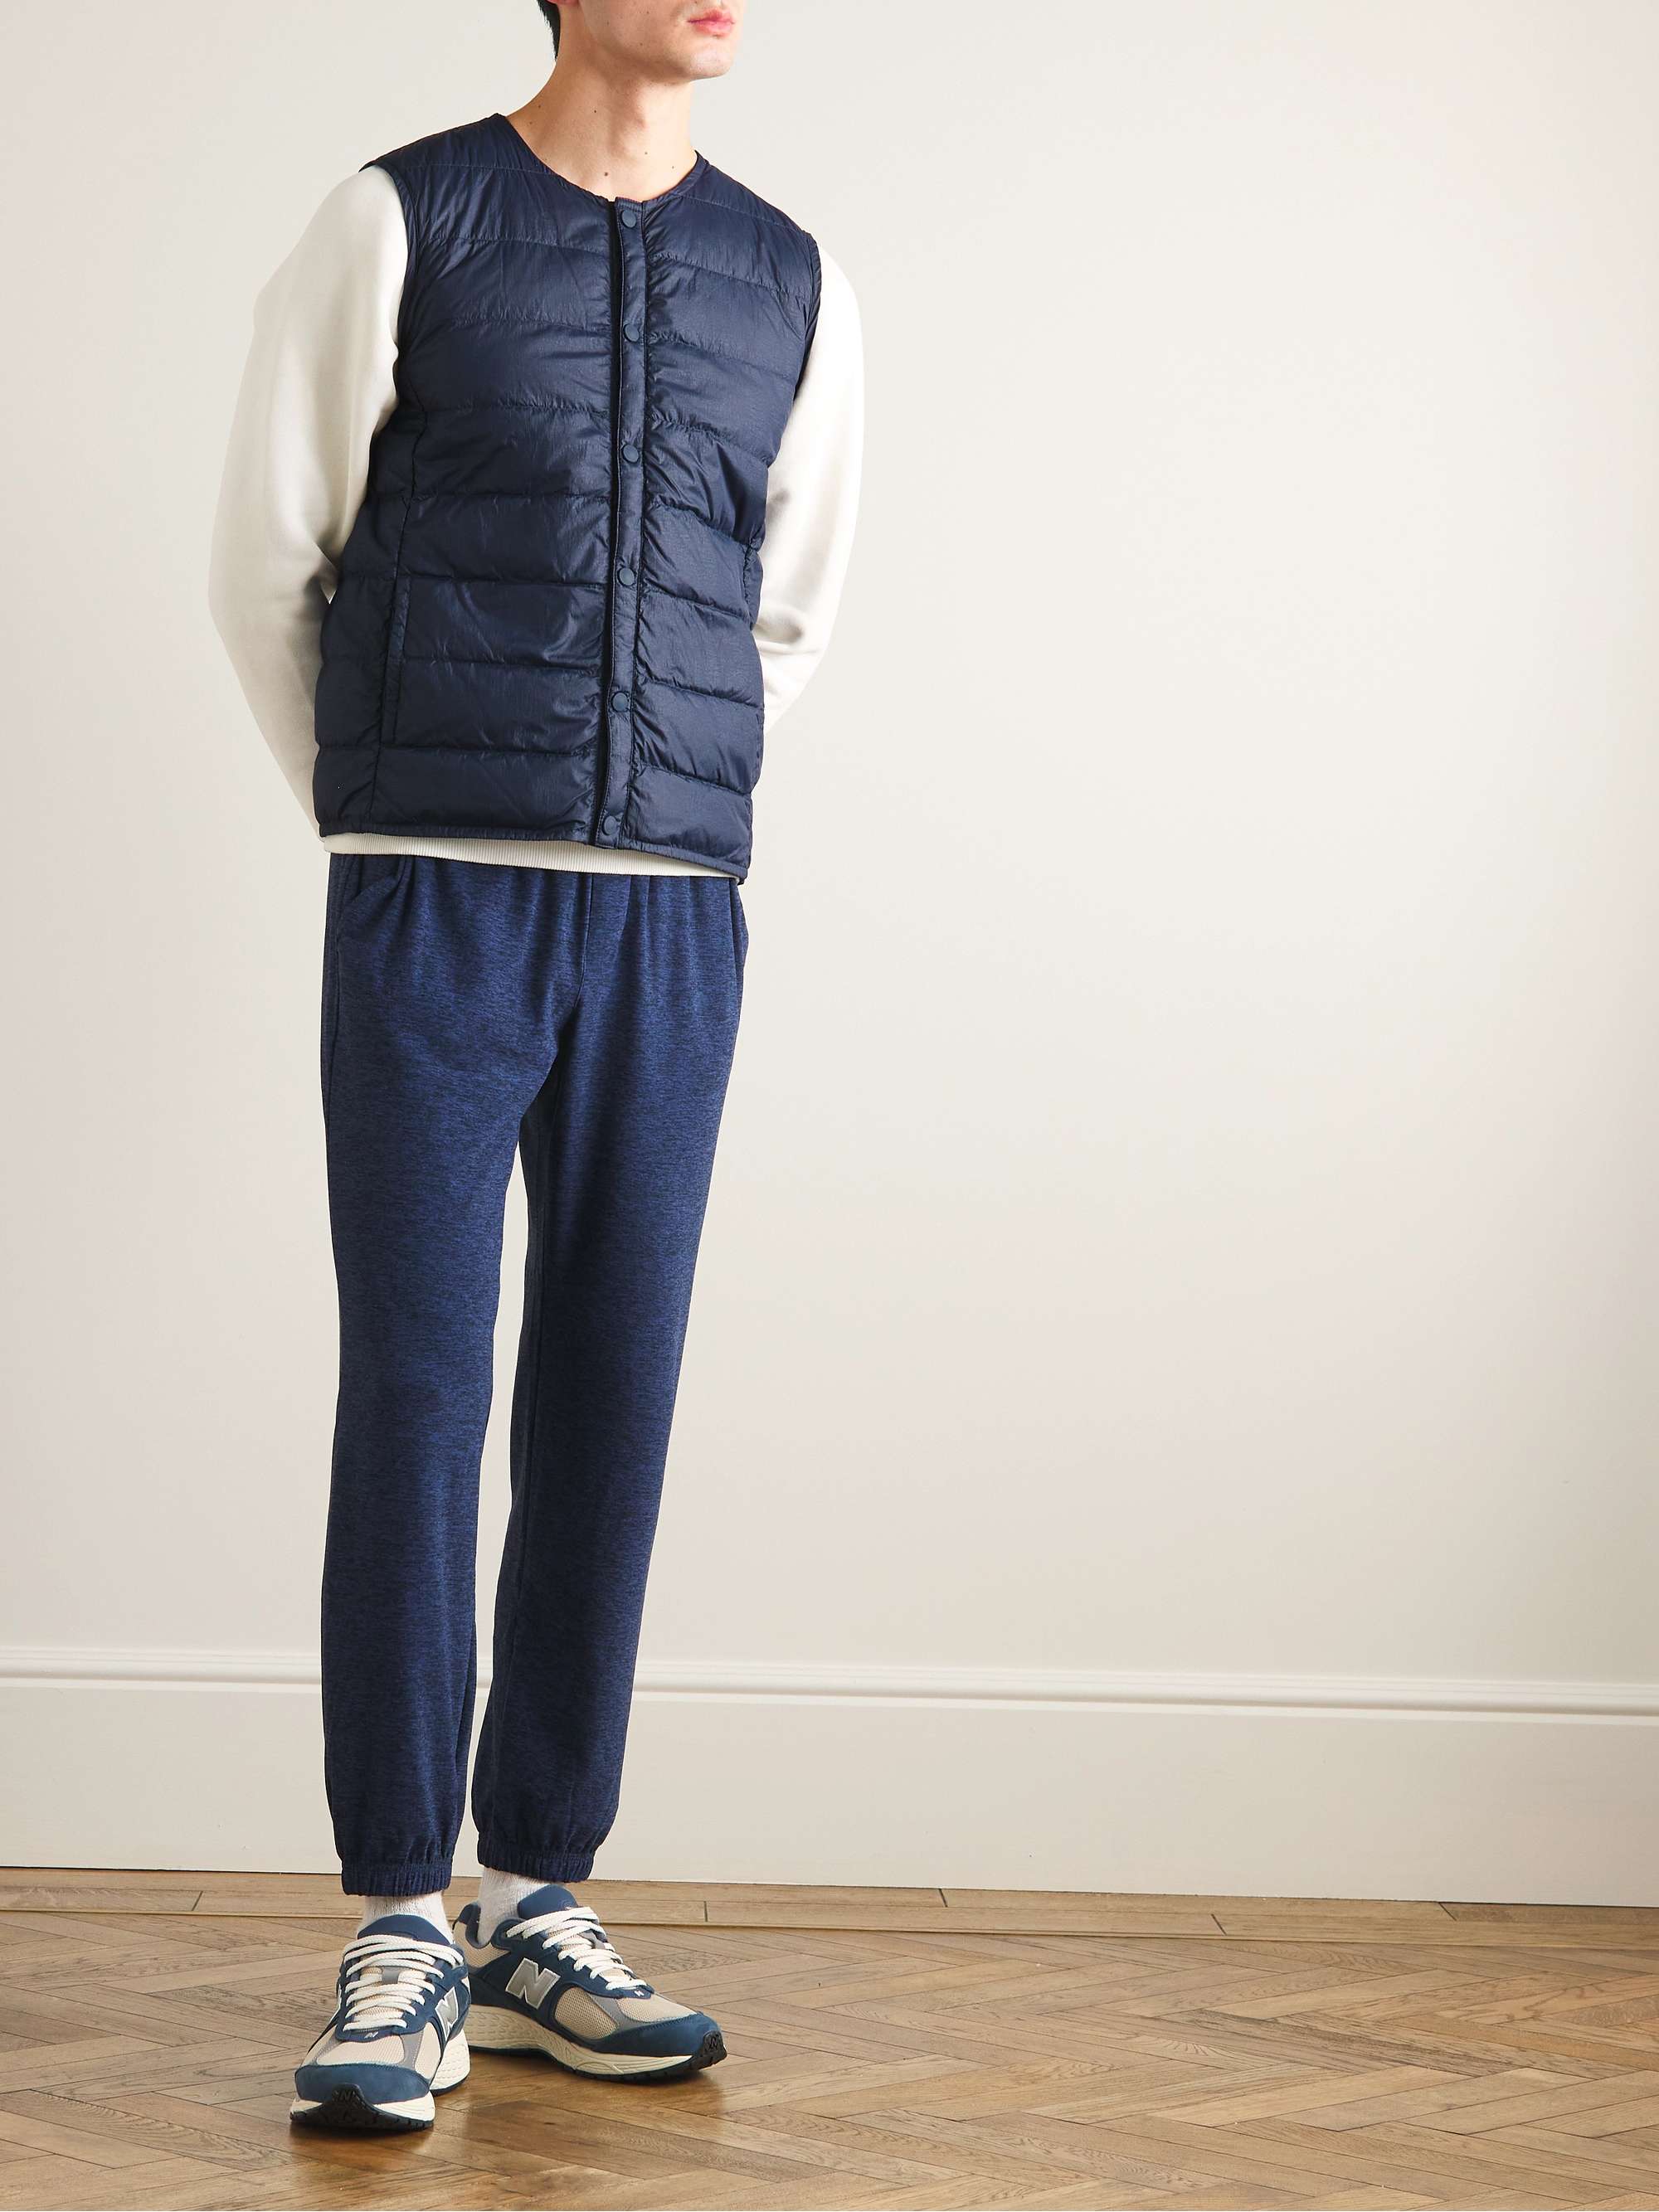 OUTDOOR VOICES Quilted SoftShield Down Gilet | MR PORTER